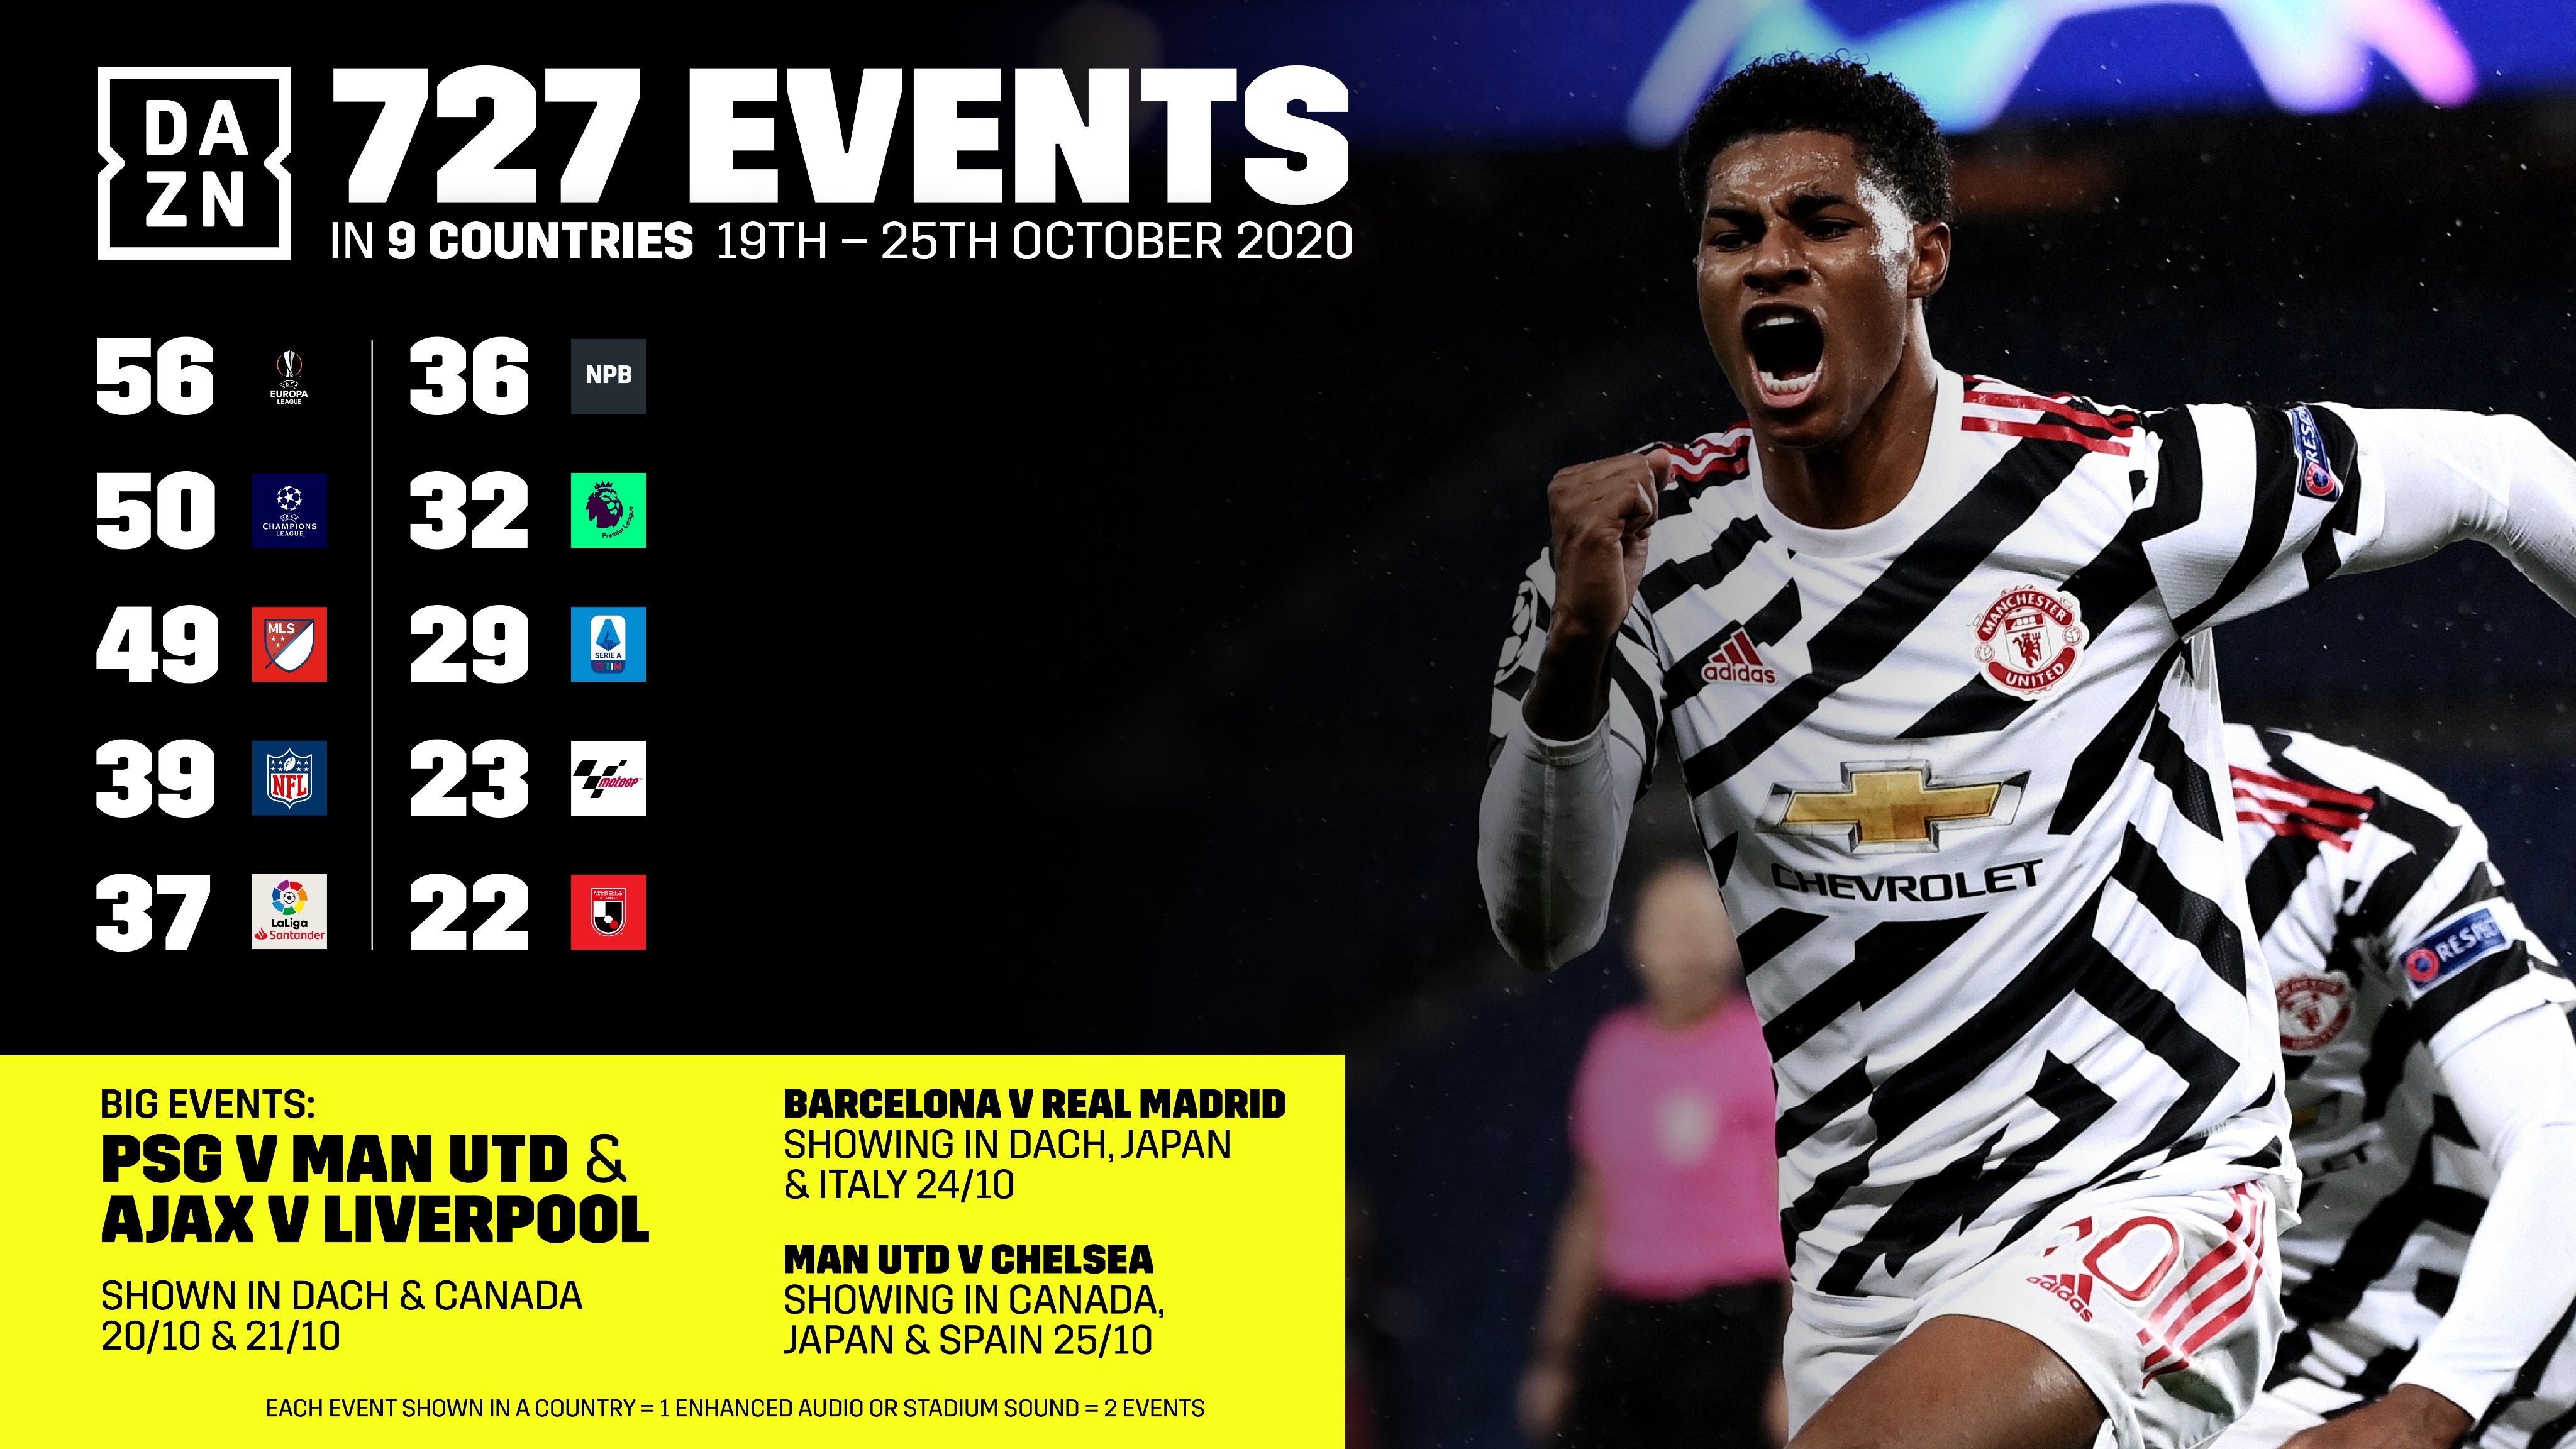 Dazn Dazn To Stream 727 Events In Nine Countries In 7 Days The Packed Sports Schedule Includes The World S Biggest Football Competitions Ucl Uel Premier League Laliga Serie A